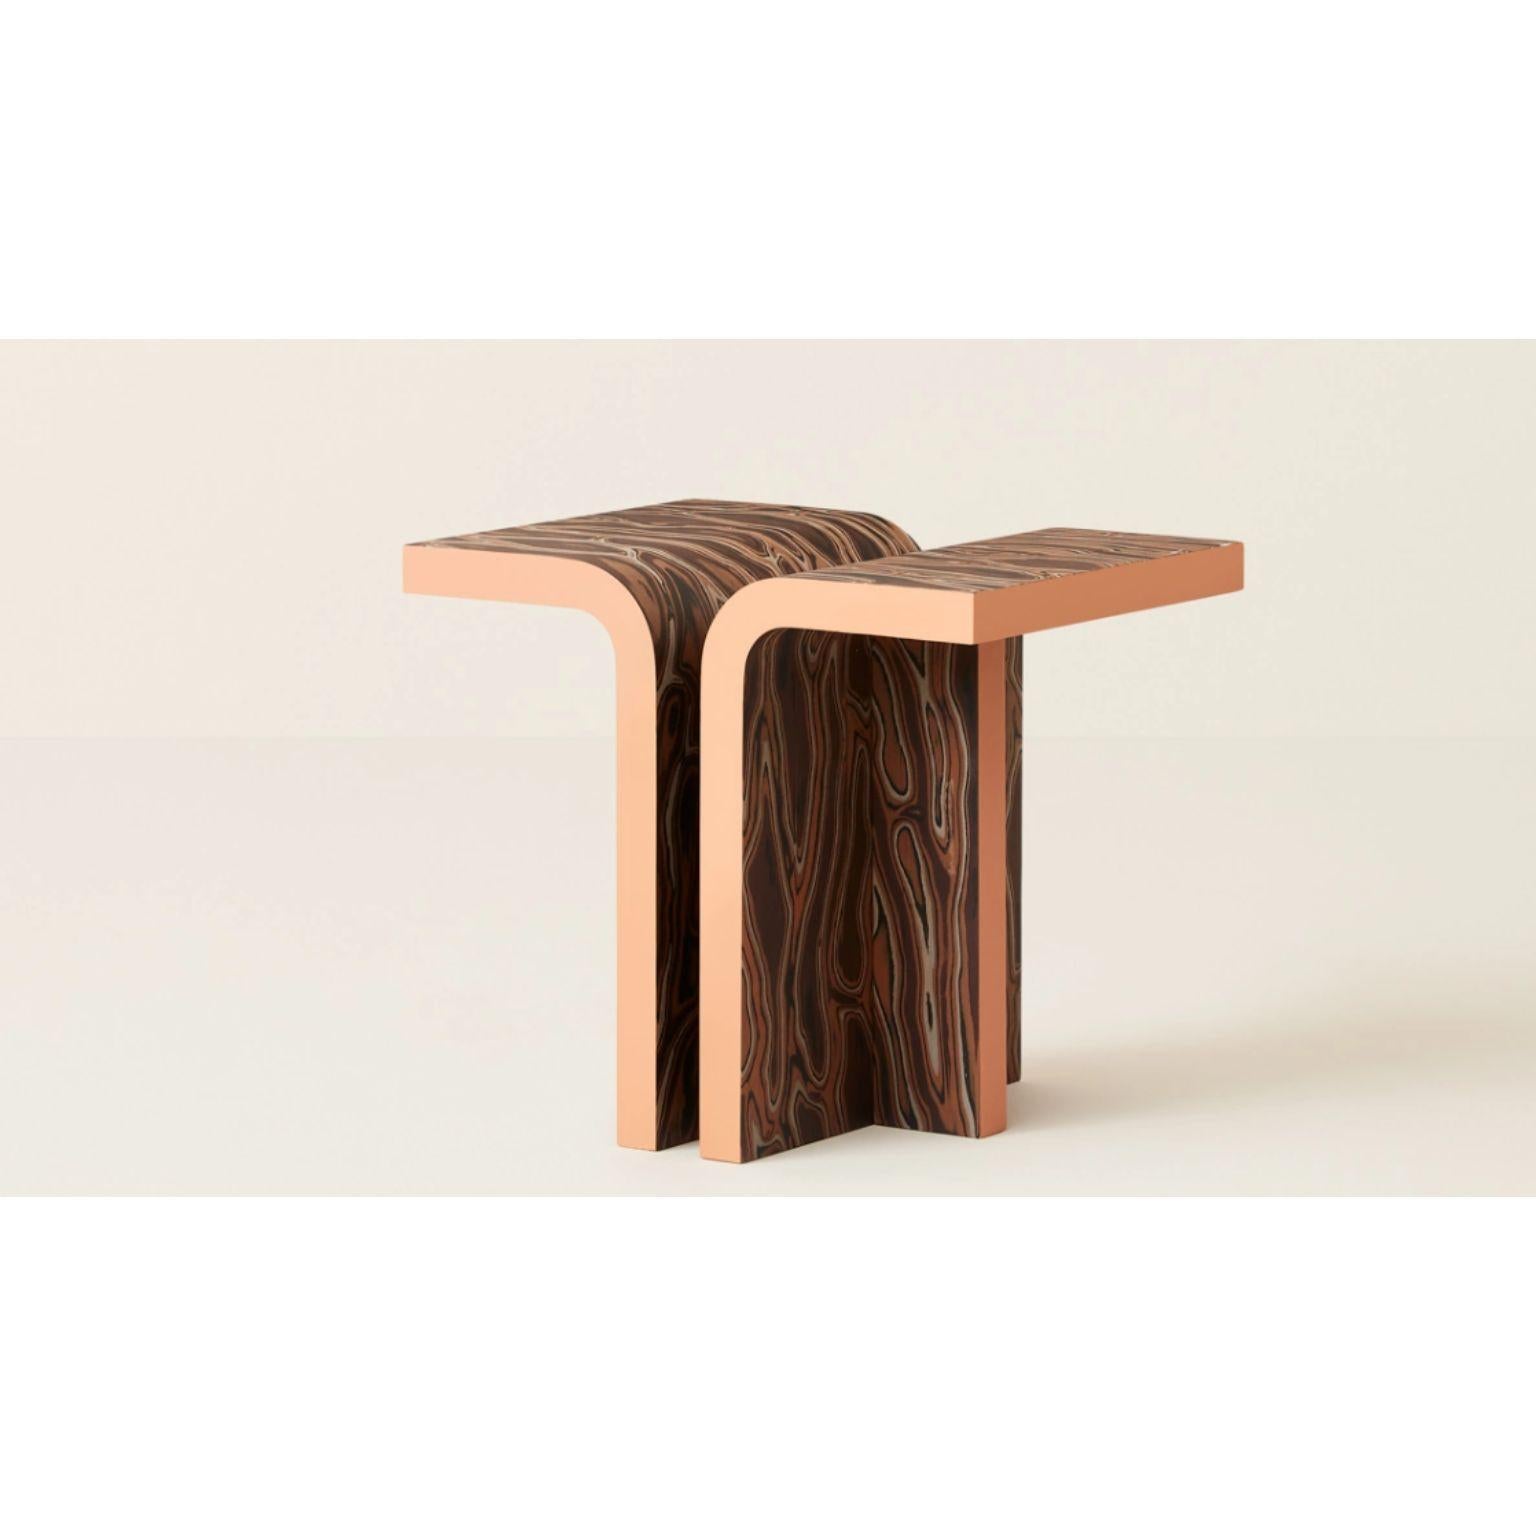 Small Rivelo Side Table by Nikolai Kotlarczyk
Dimensions: D 54 x W 40 x H 45 cm. 
Materials: Folded plywood, Alpi veneer.
Also available in other designs and dimensions.


Nikolai Kotlarczyk is an Australian designer based in Copenhagen,